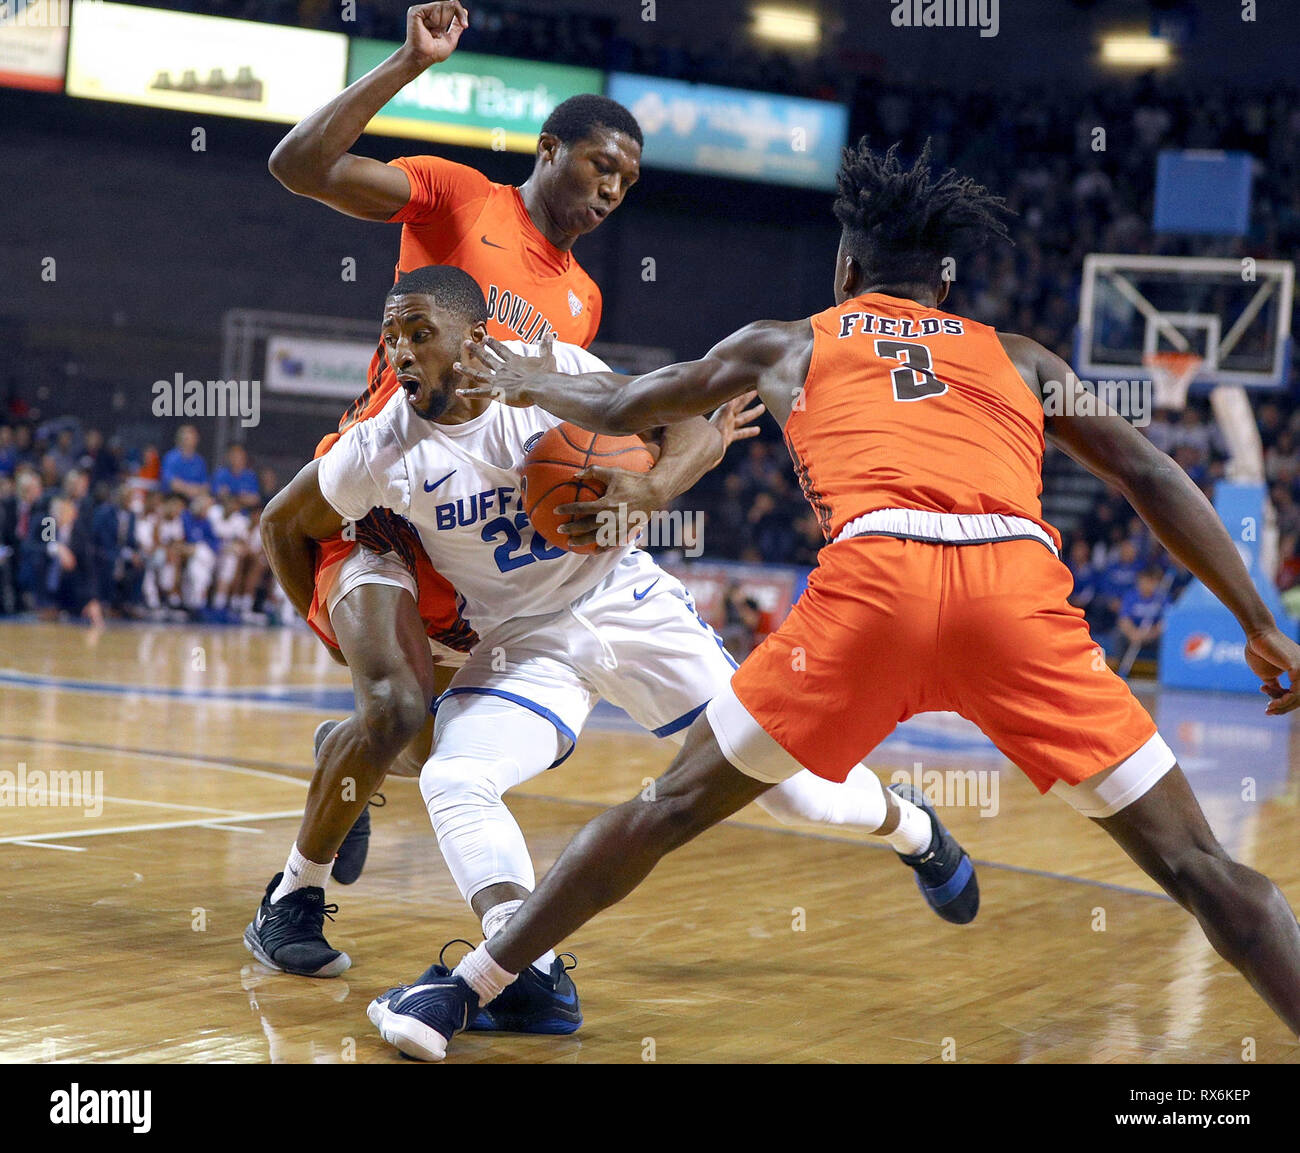 New York, USA. 8th Mar 2019. Mar 08, 2019: Buffalo Bulls guard Dontay Caruthers (22) drives ball to the basket against Bowling Green Falcons forward Daeqwon Plowden (25) and guard Caleb Fields (3) during the first half of play in the NCAA Basketball game between the Bowling Green Falcons and Buffalo Bulls at Alumni Arena in Amherst, N.Y. (Nicholas T. LoVerde/Cal Sport Media) Credit: Cal Sport Media/Alamy Live News Stock Photo